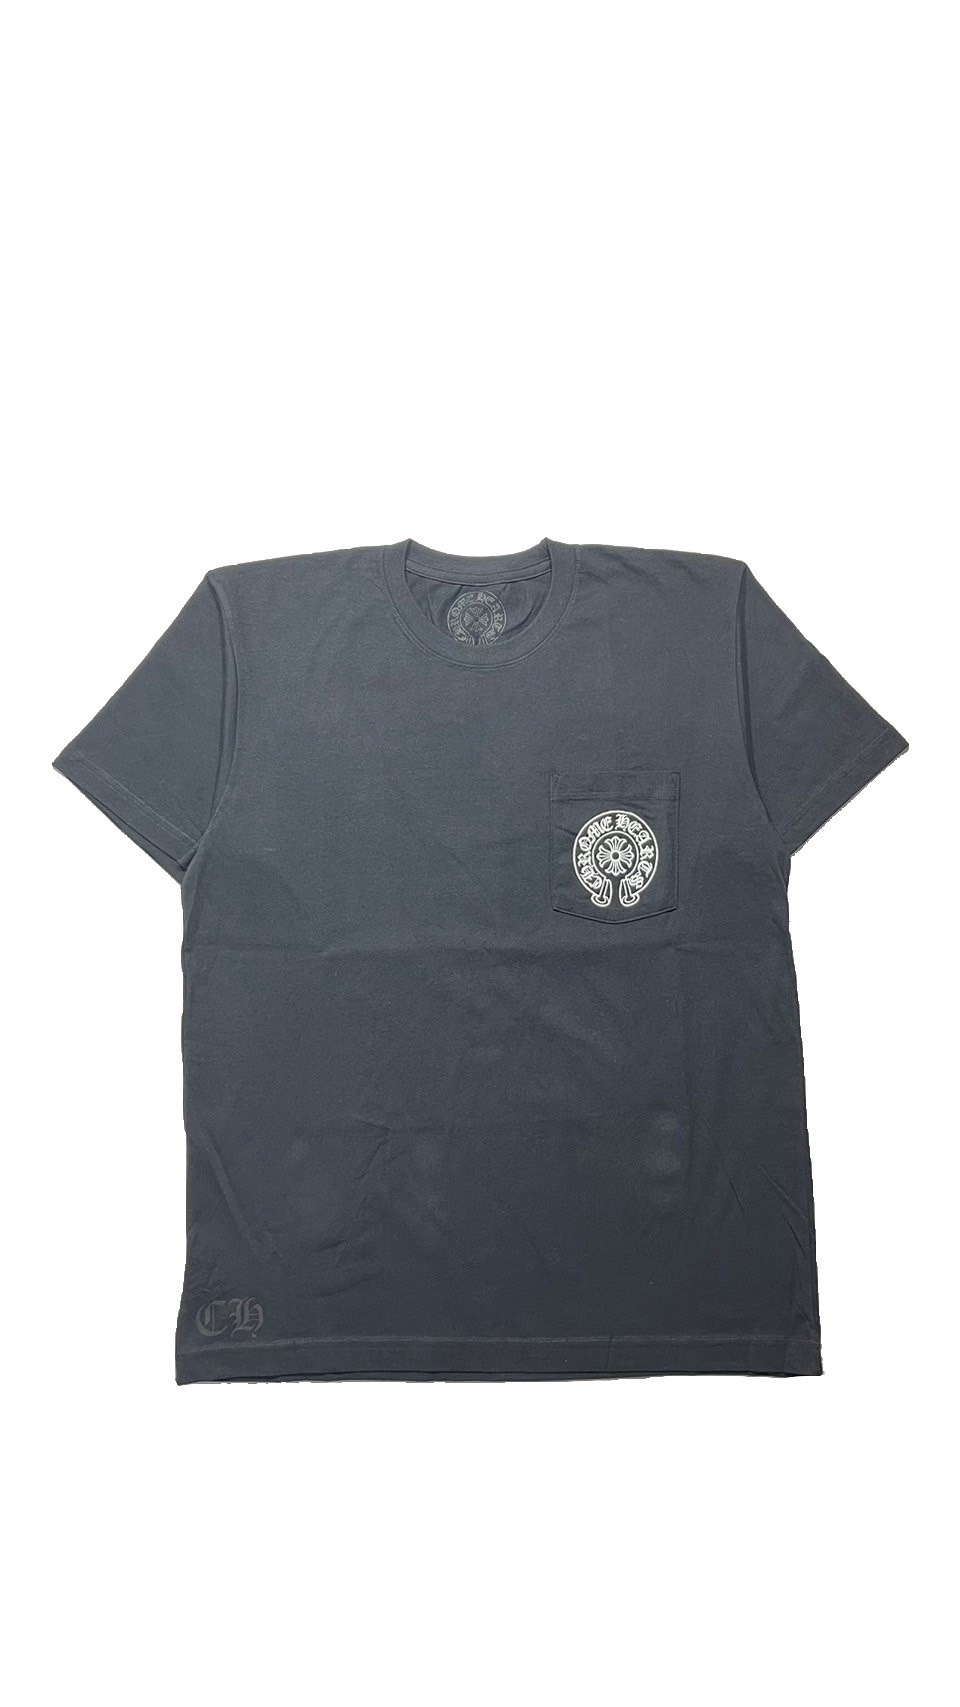 CHROME HEARTS　TheHeroesProject Tee